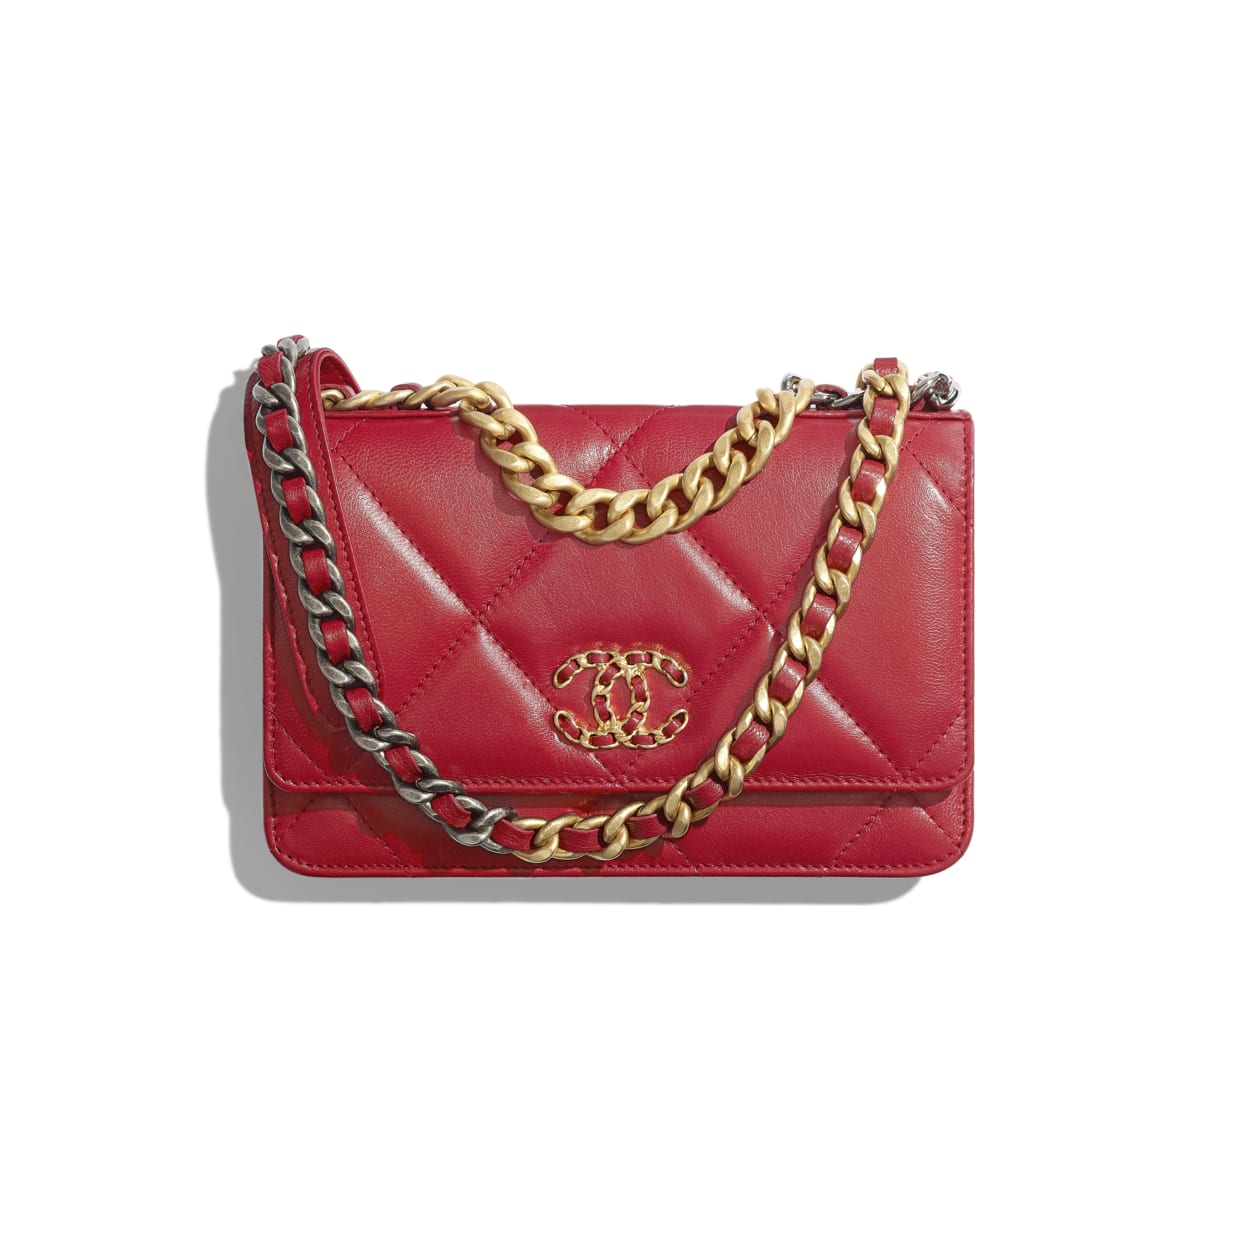 Chanel Spring/Summer 2020 Act 2 Small Leather Goods Collection - Spotted  Fashion